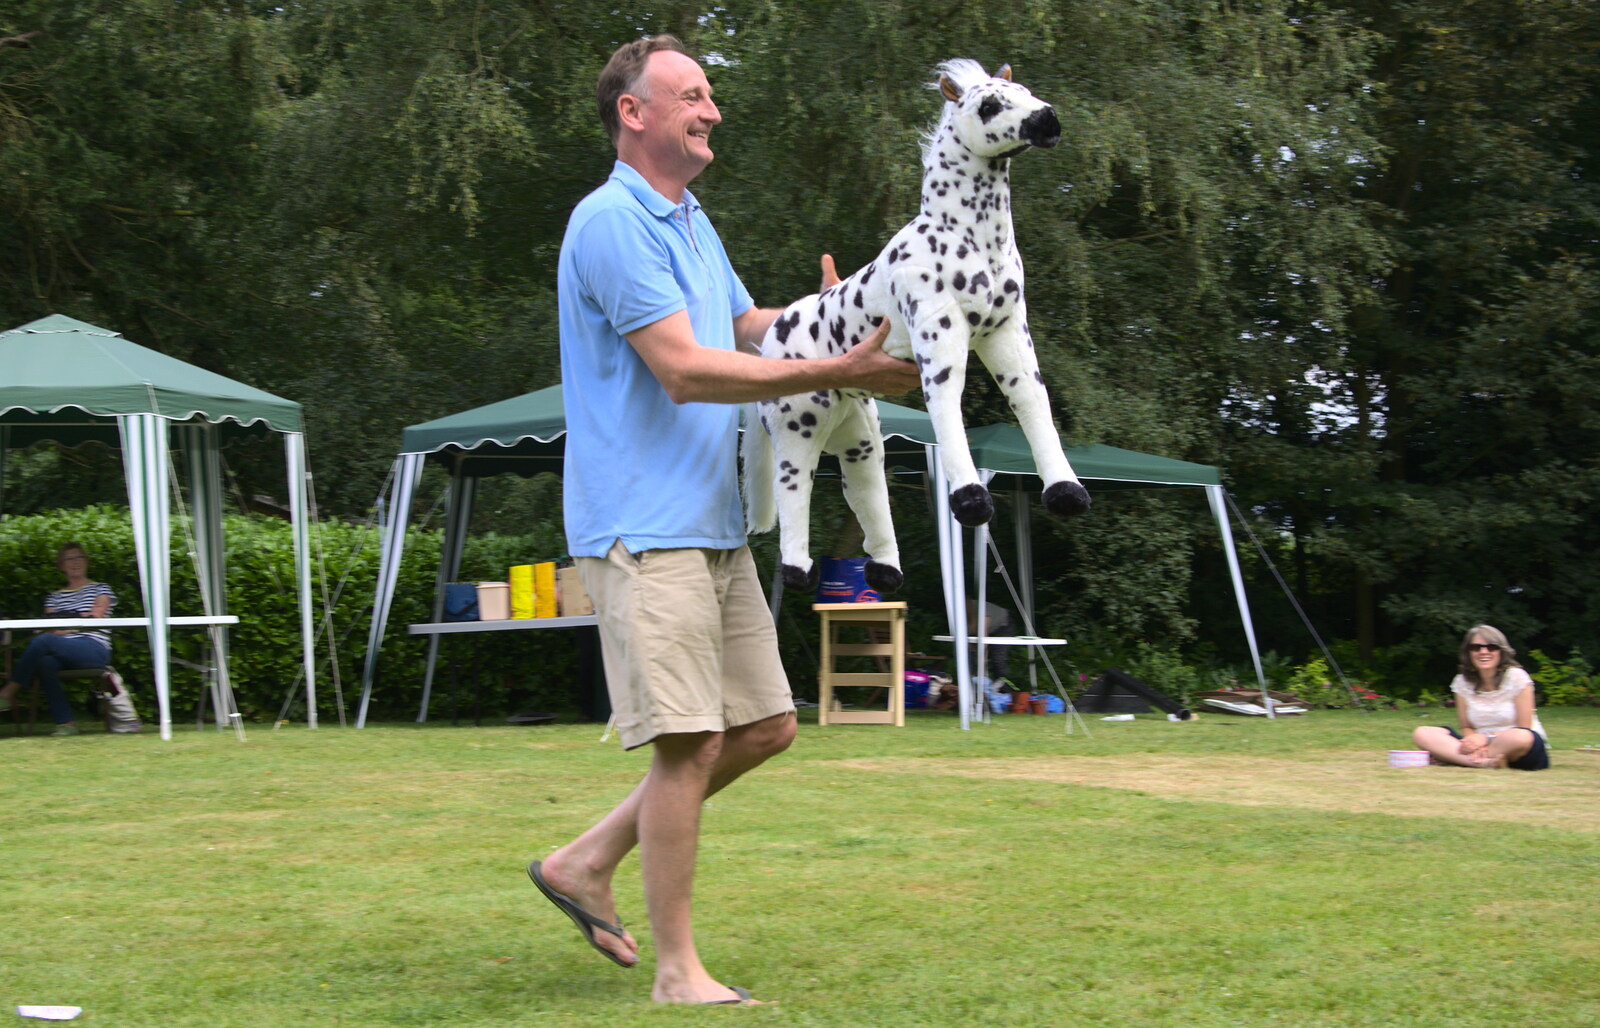 A spotty horse toy is hauled around from The Village Summer Fête, Brome, Suffolk - 5th July 2014